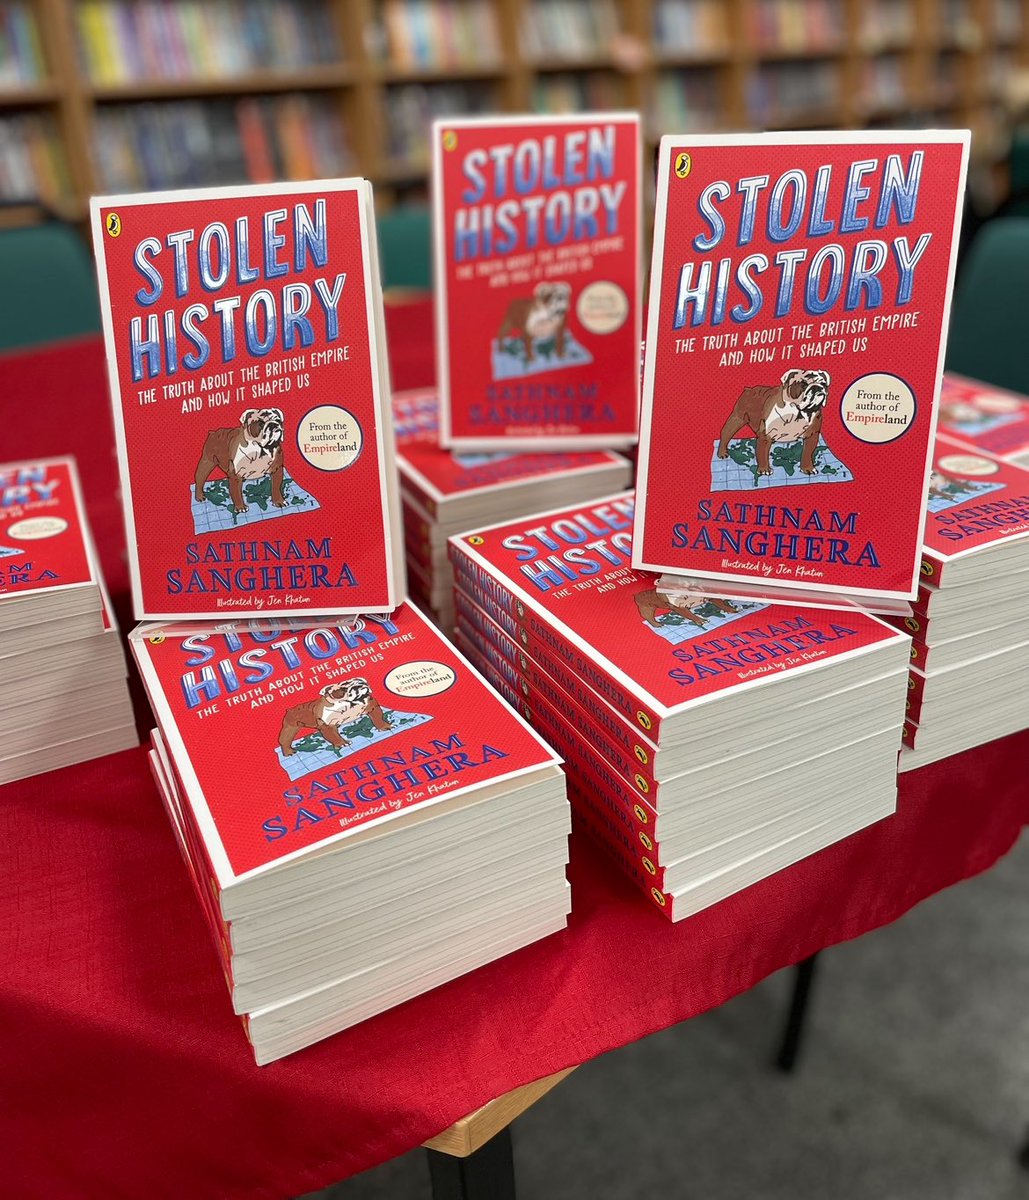 ⭐️Special Offer!⭐️ We have a class set of 30 copies of Stolen History by @Sathnam. This is a must read for the History curriculum. The truth about the British Empire and how it shaped us. Set of 30 for £199.00. Contact info in bio. #History #BritishEmpire #KS3